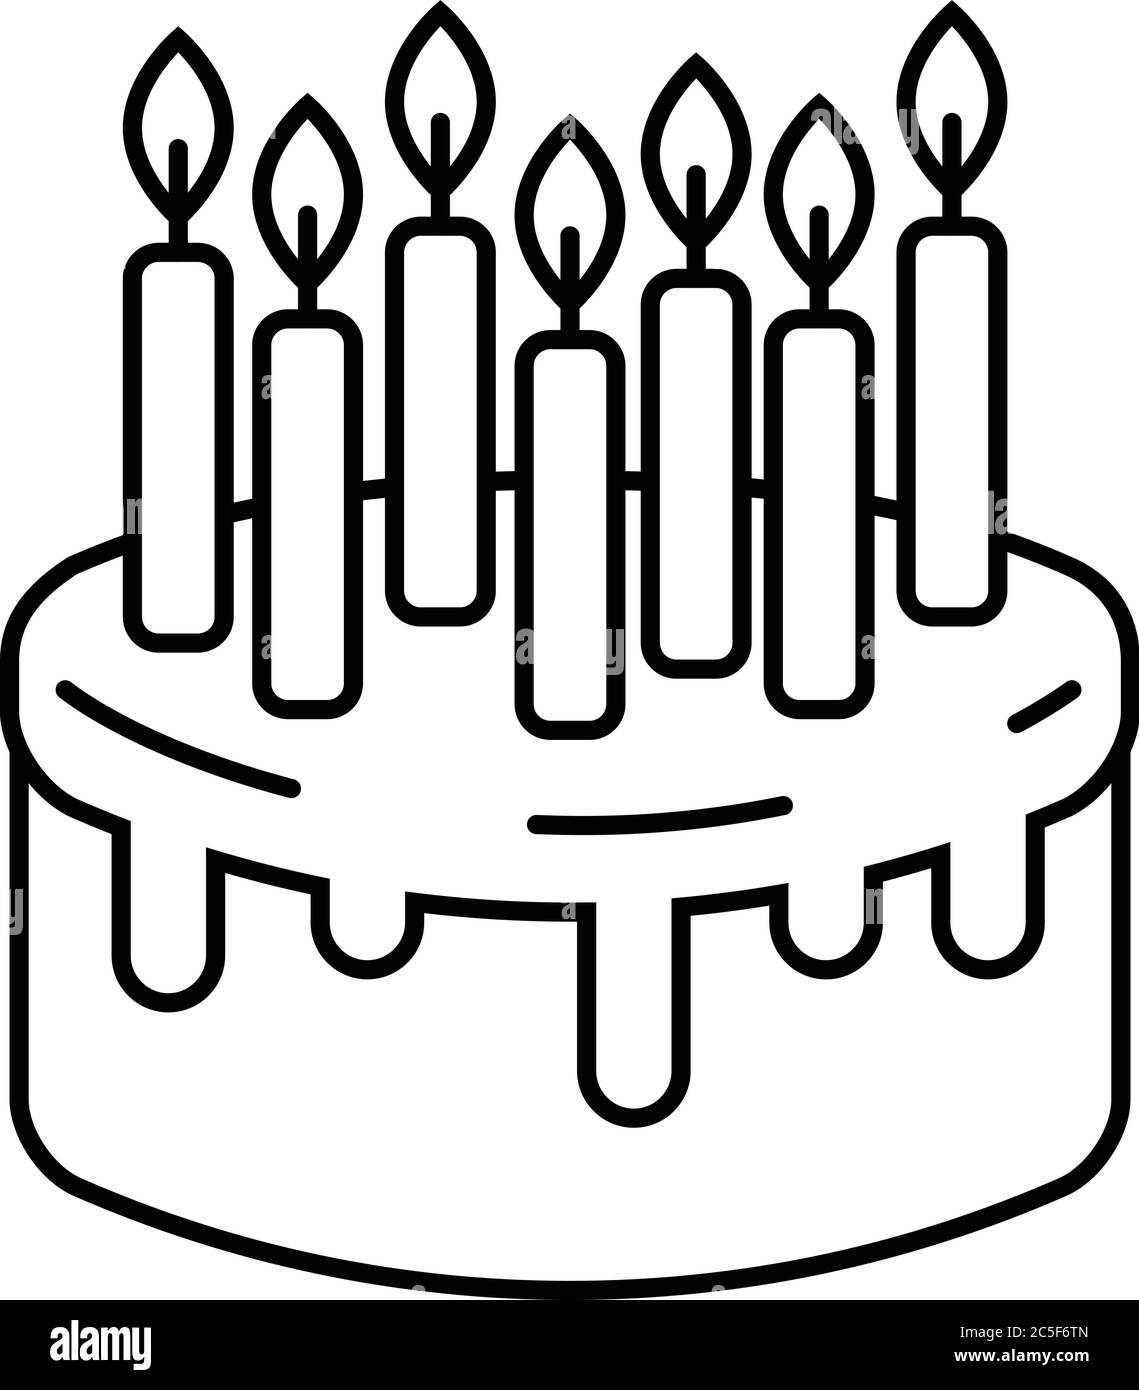 Birthday Cake Icon With Candles Sweet Party Dessert Symbol Vector Illustration Stock Vector